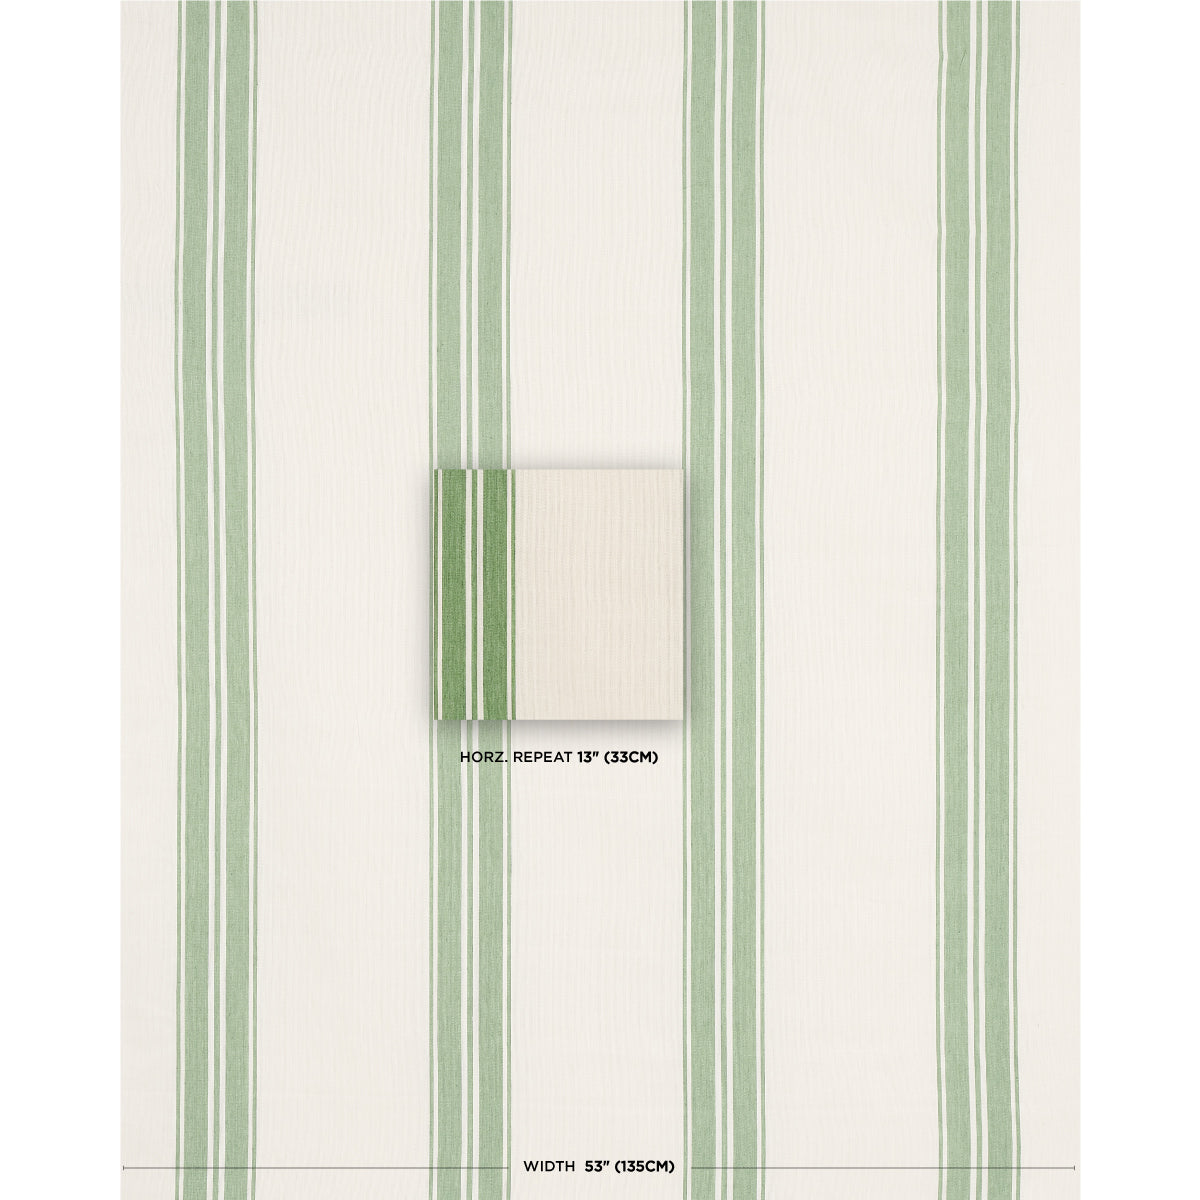 Purchase 70873 Brentwood Stripe, Leaf Green by Schumacher Fabric 1